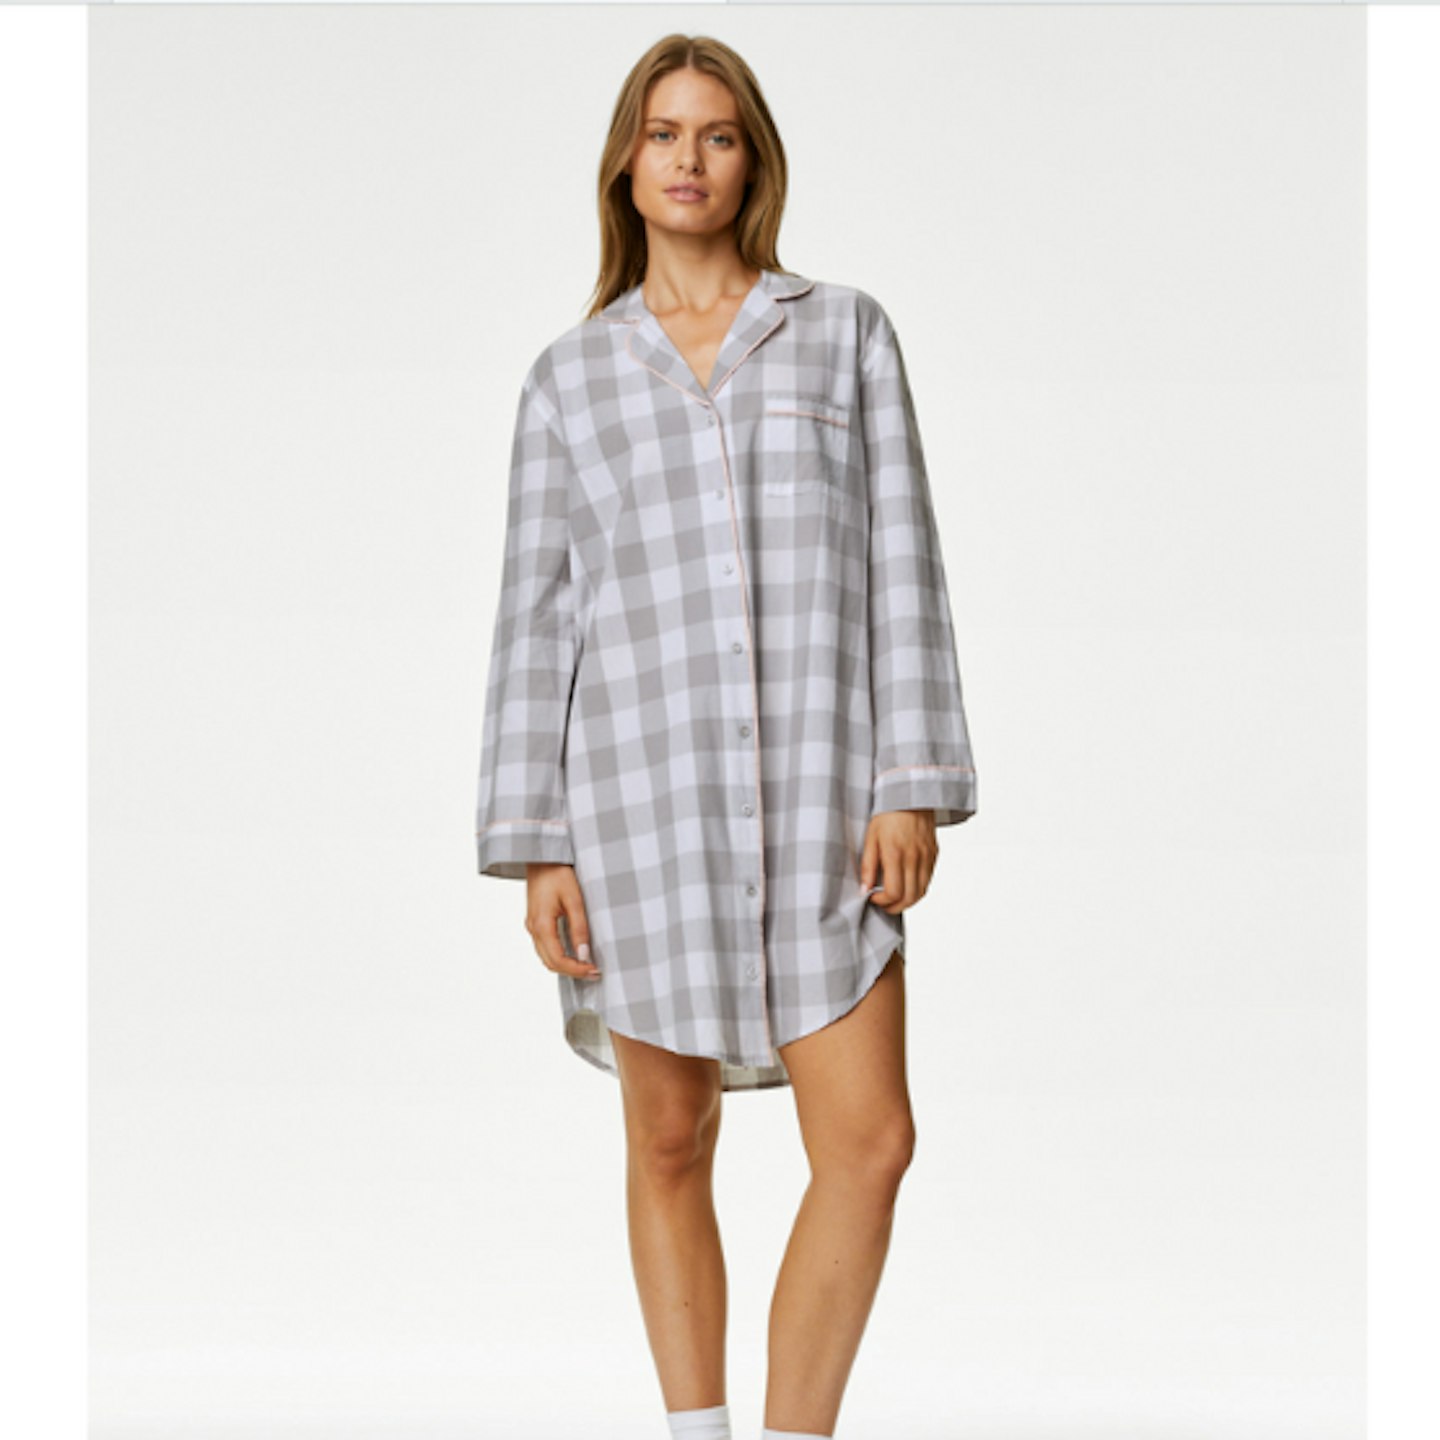 What to wear in labour nightshirt